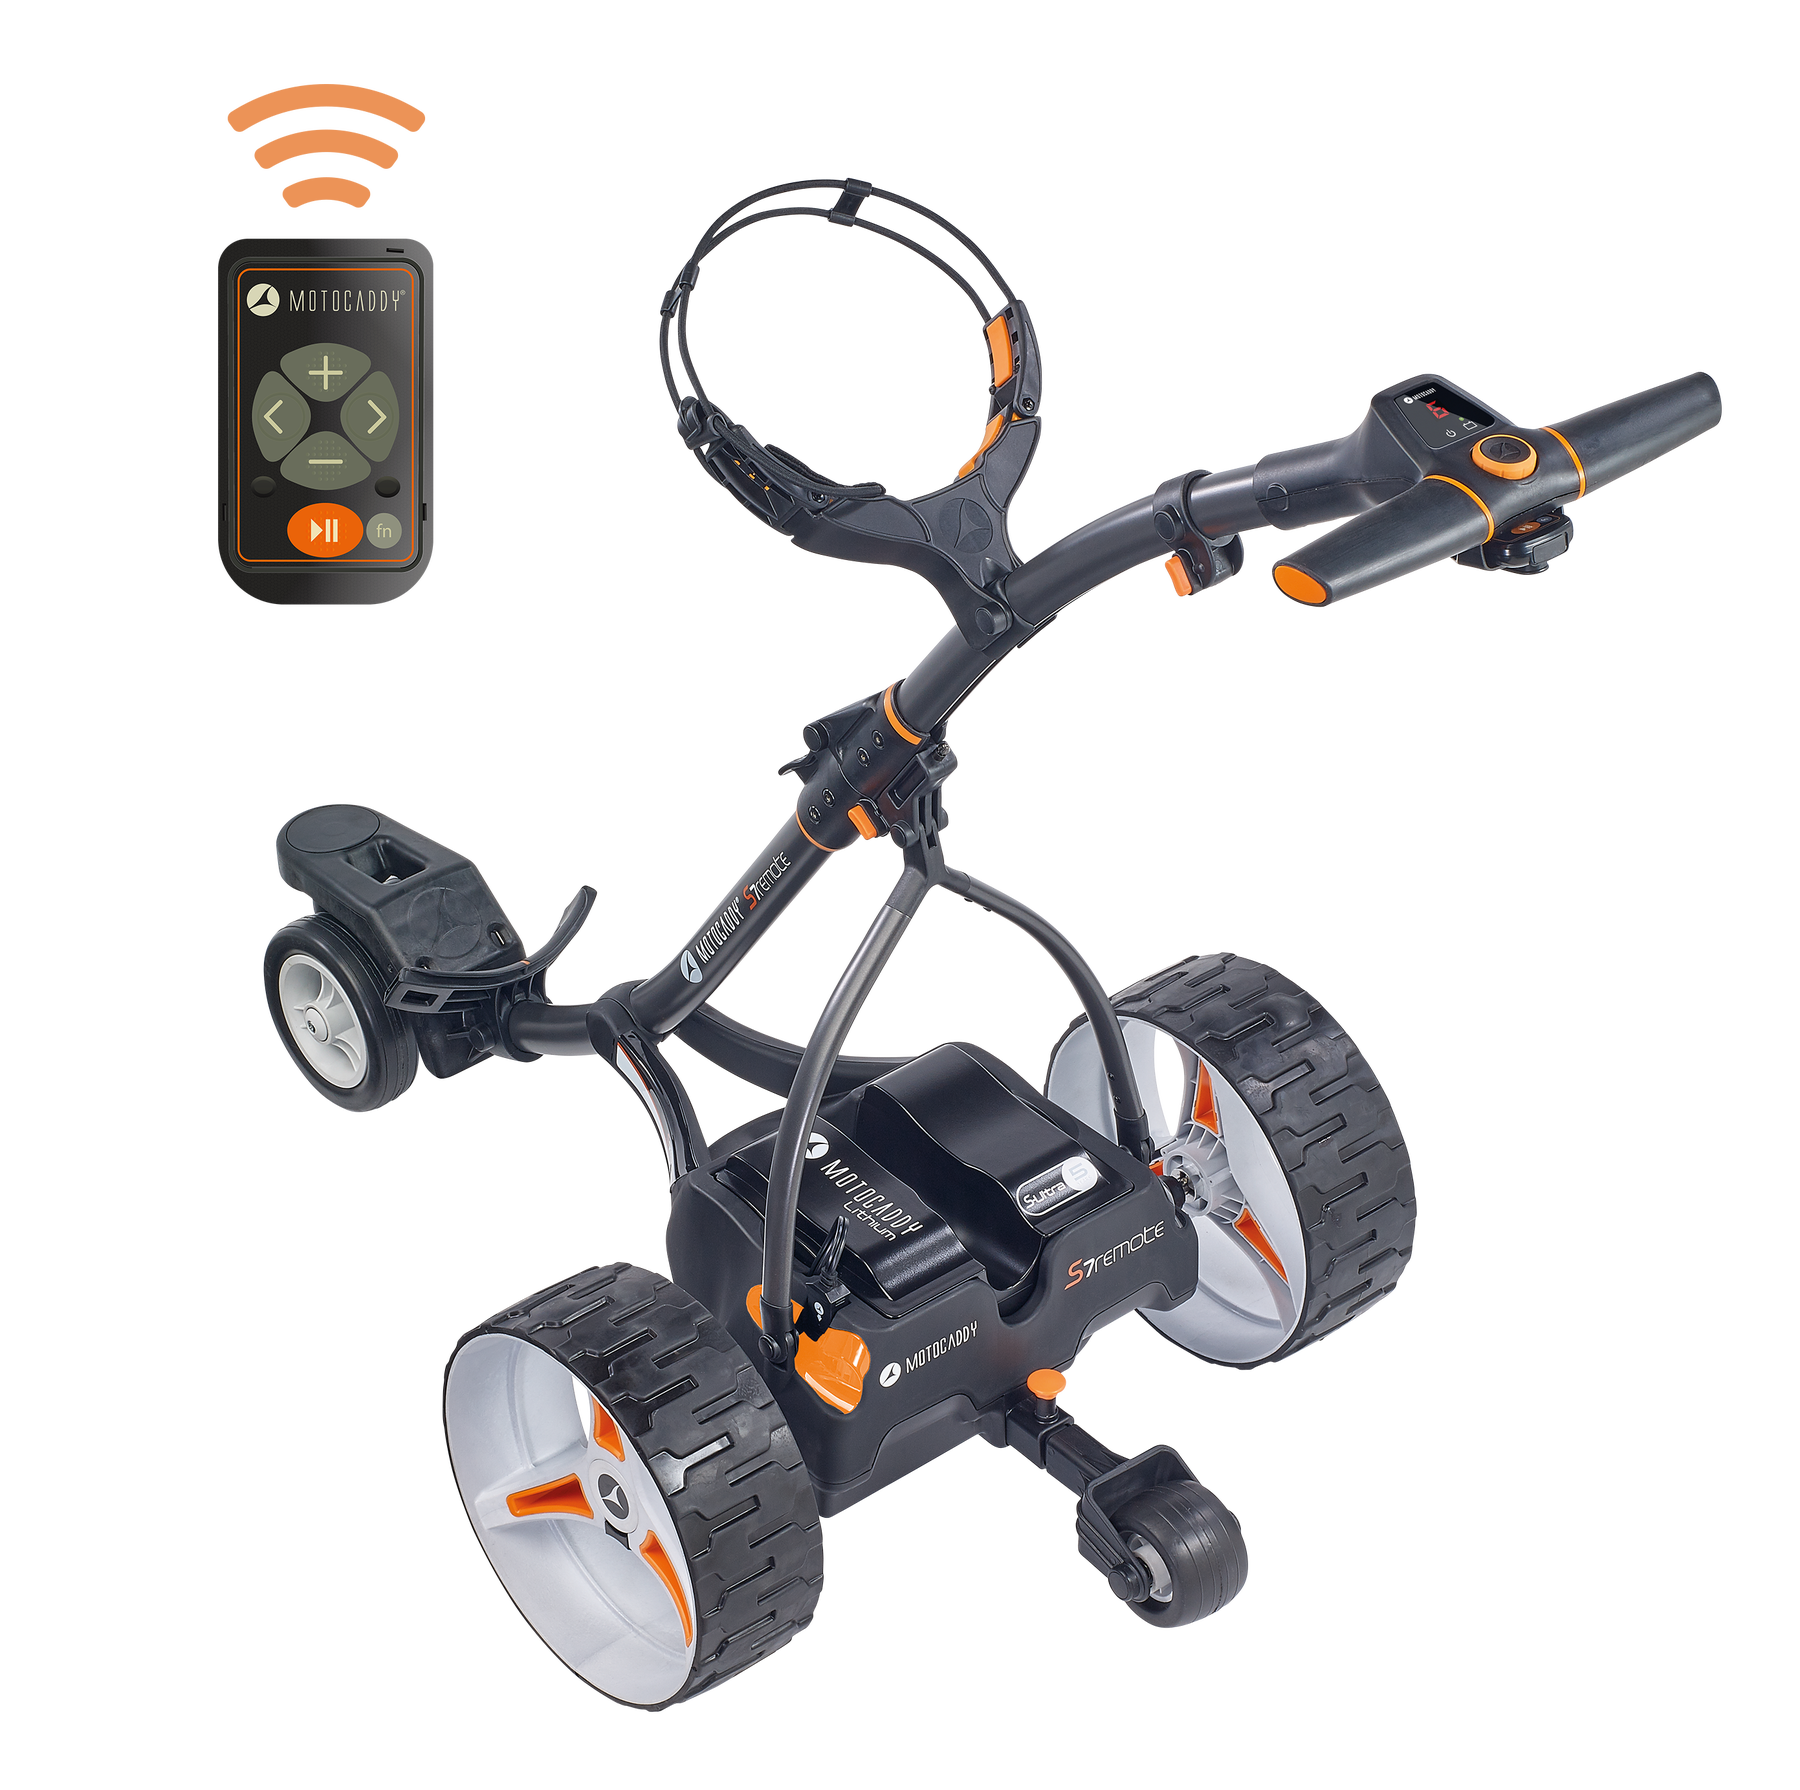 Motocaddy corrected S7 REMOTE Graphite High-Angled with Handset